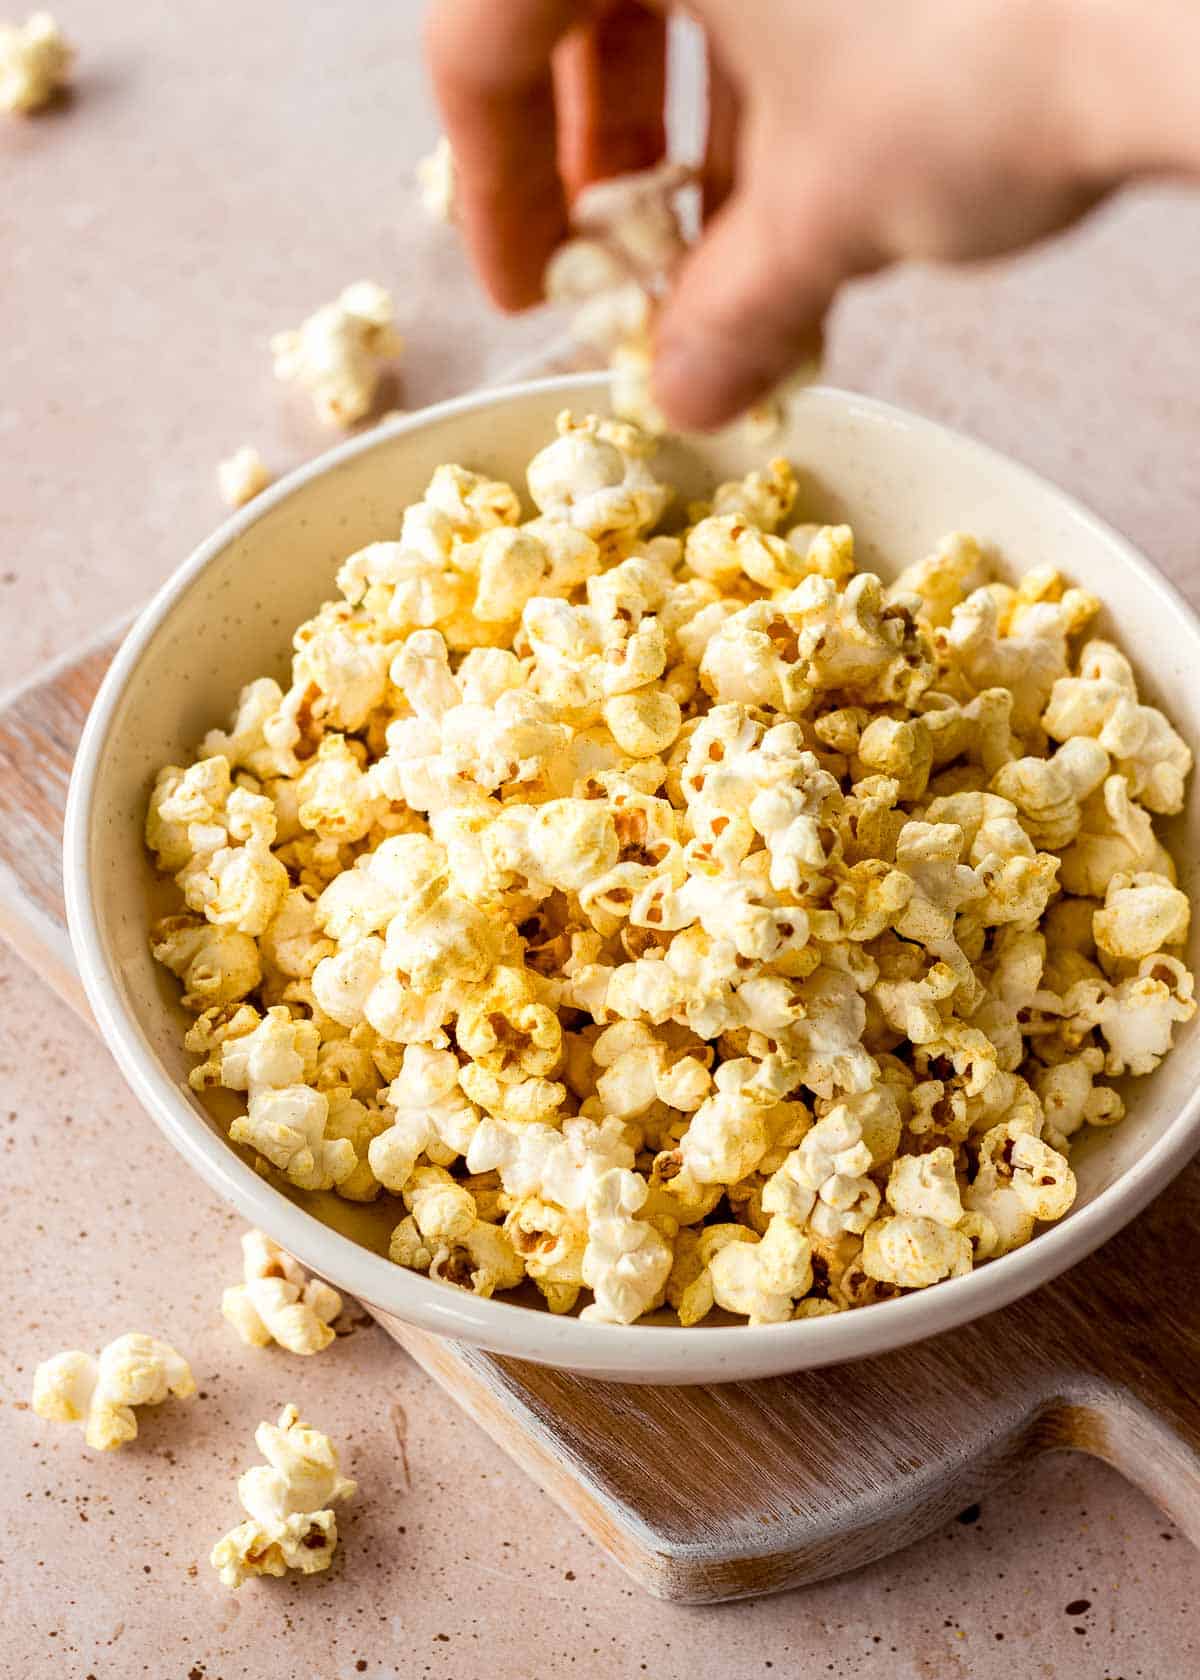 A woman's hand grabs a piece of vegan popcorn from a white bowl on a chopping board. There are pieces of popcorn scattered around.